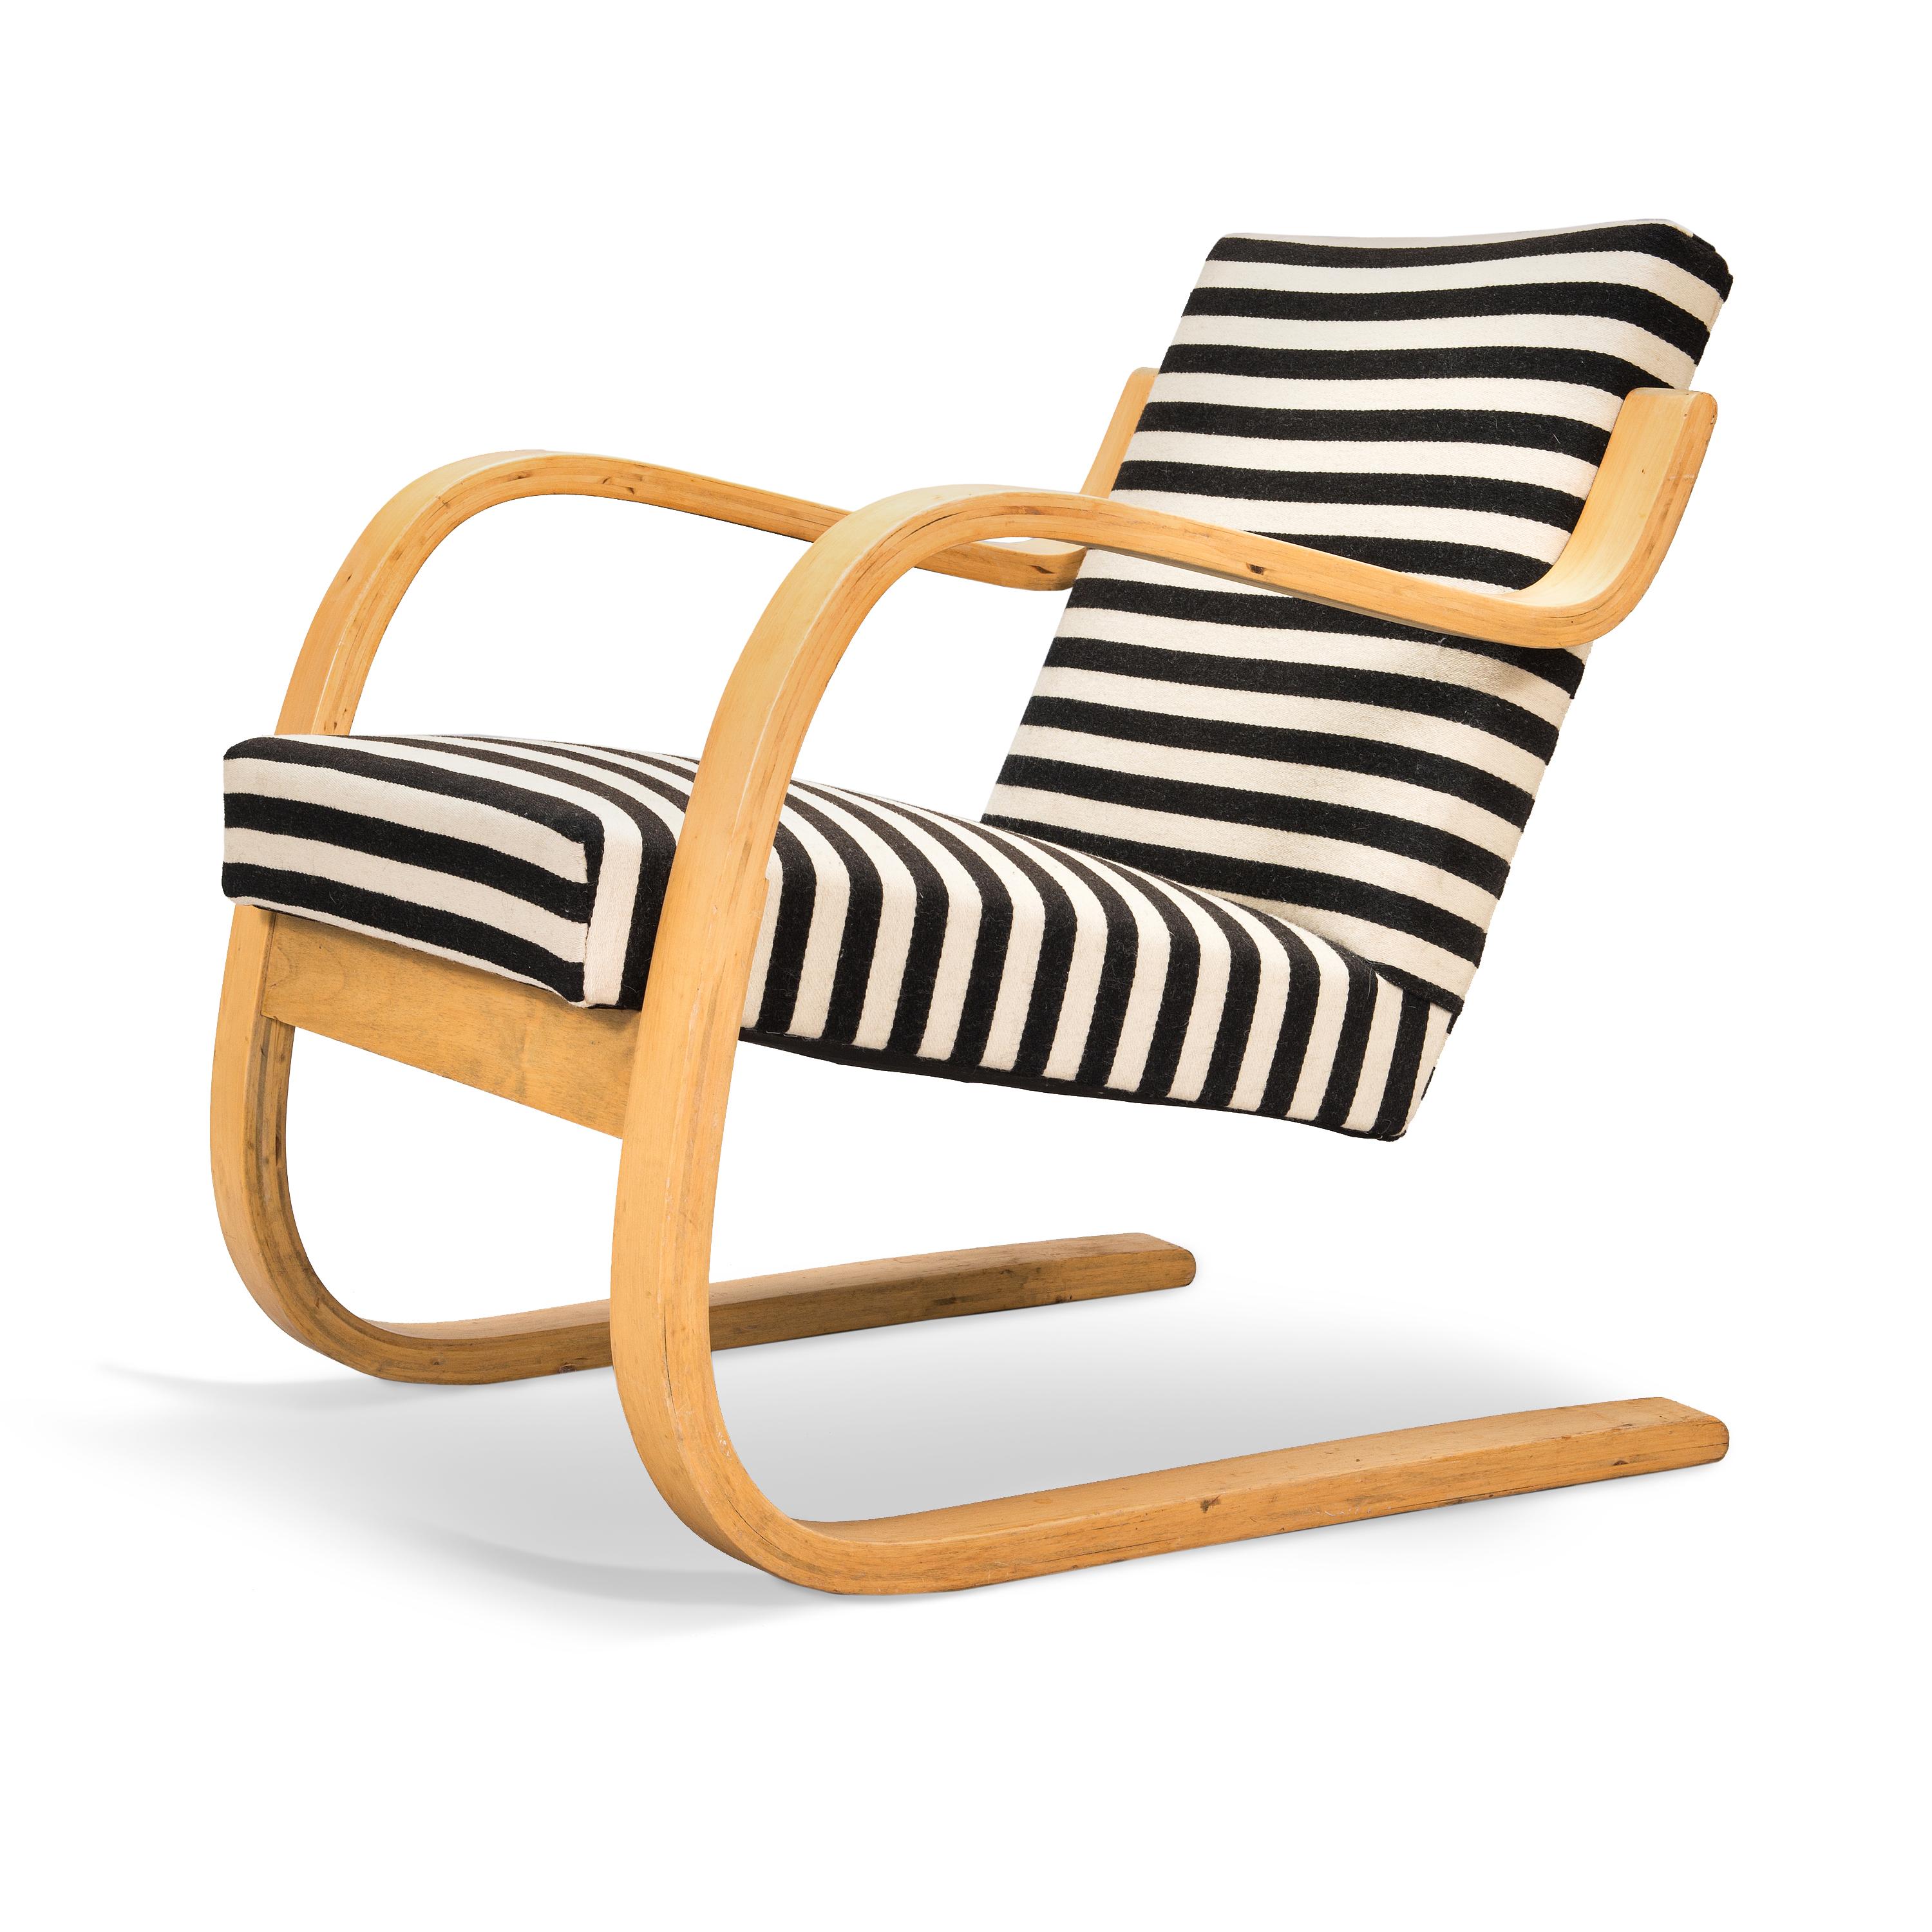 Finnish architect and designer Alvar Aalto '34/402' armchair for O.Y. Huonekalu- ja Rakennustyötehdas A.B. Finland. Designed in 1933 and likely produced in the 1960's. Frame is made from laminated birch. Upholstered in a striped wool blend fabric,